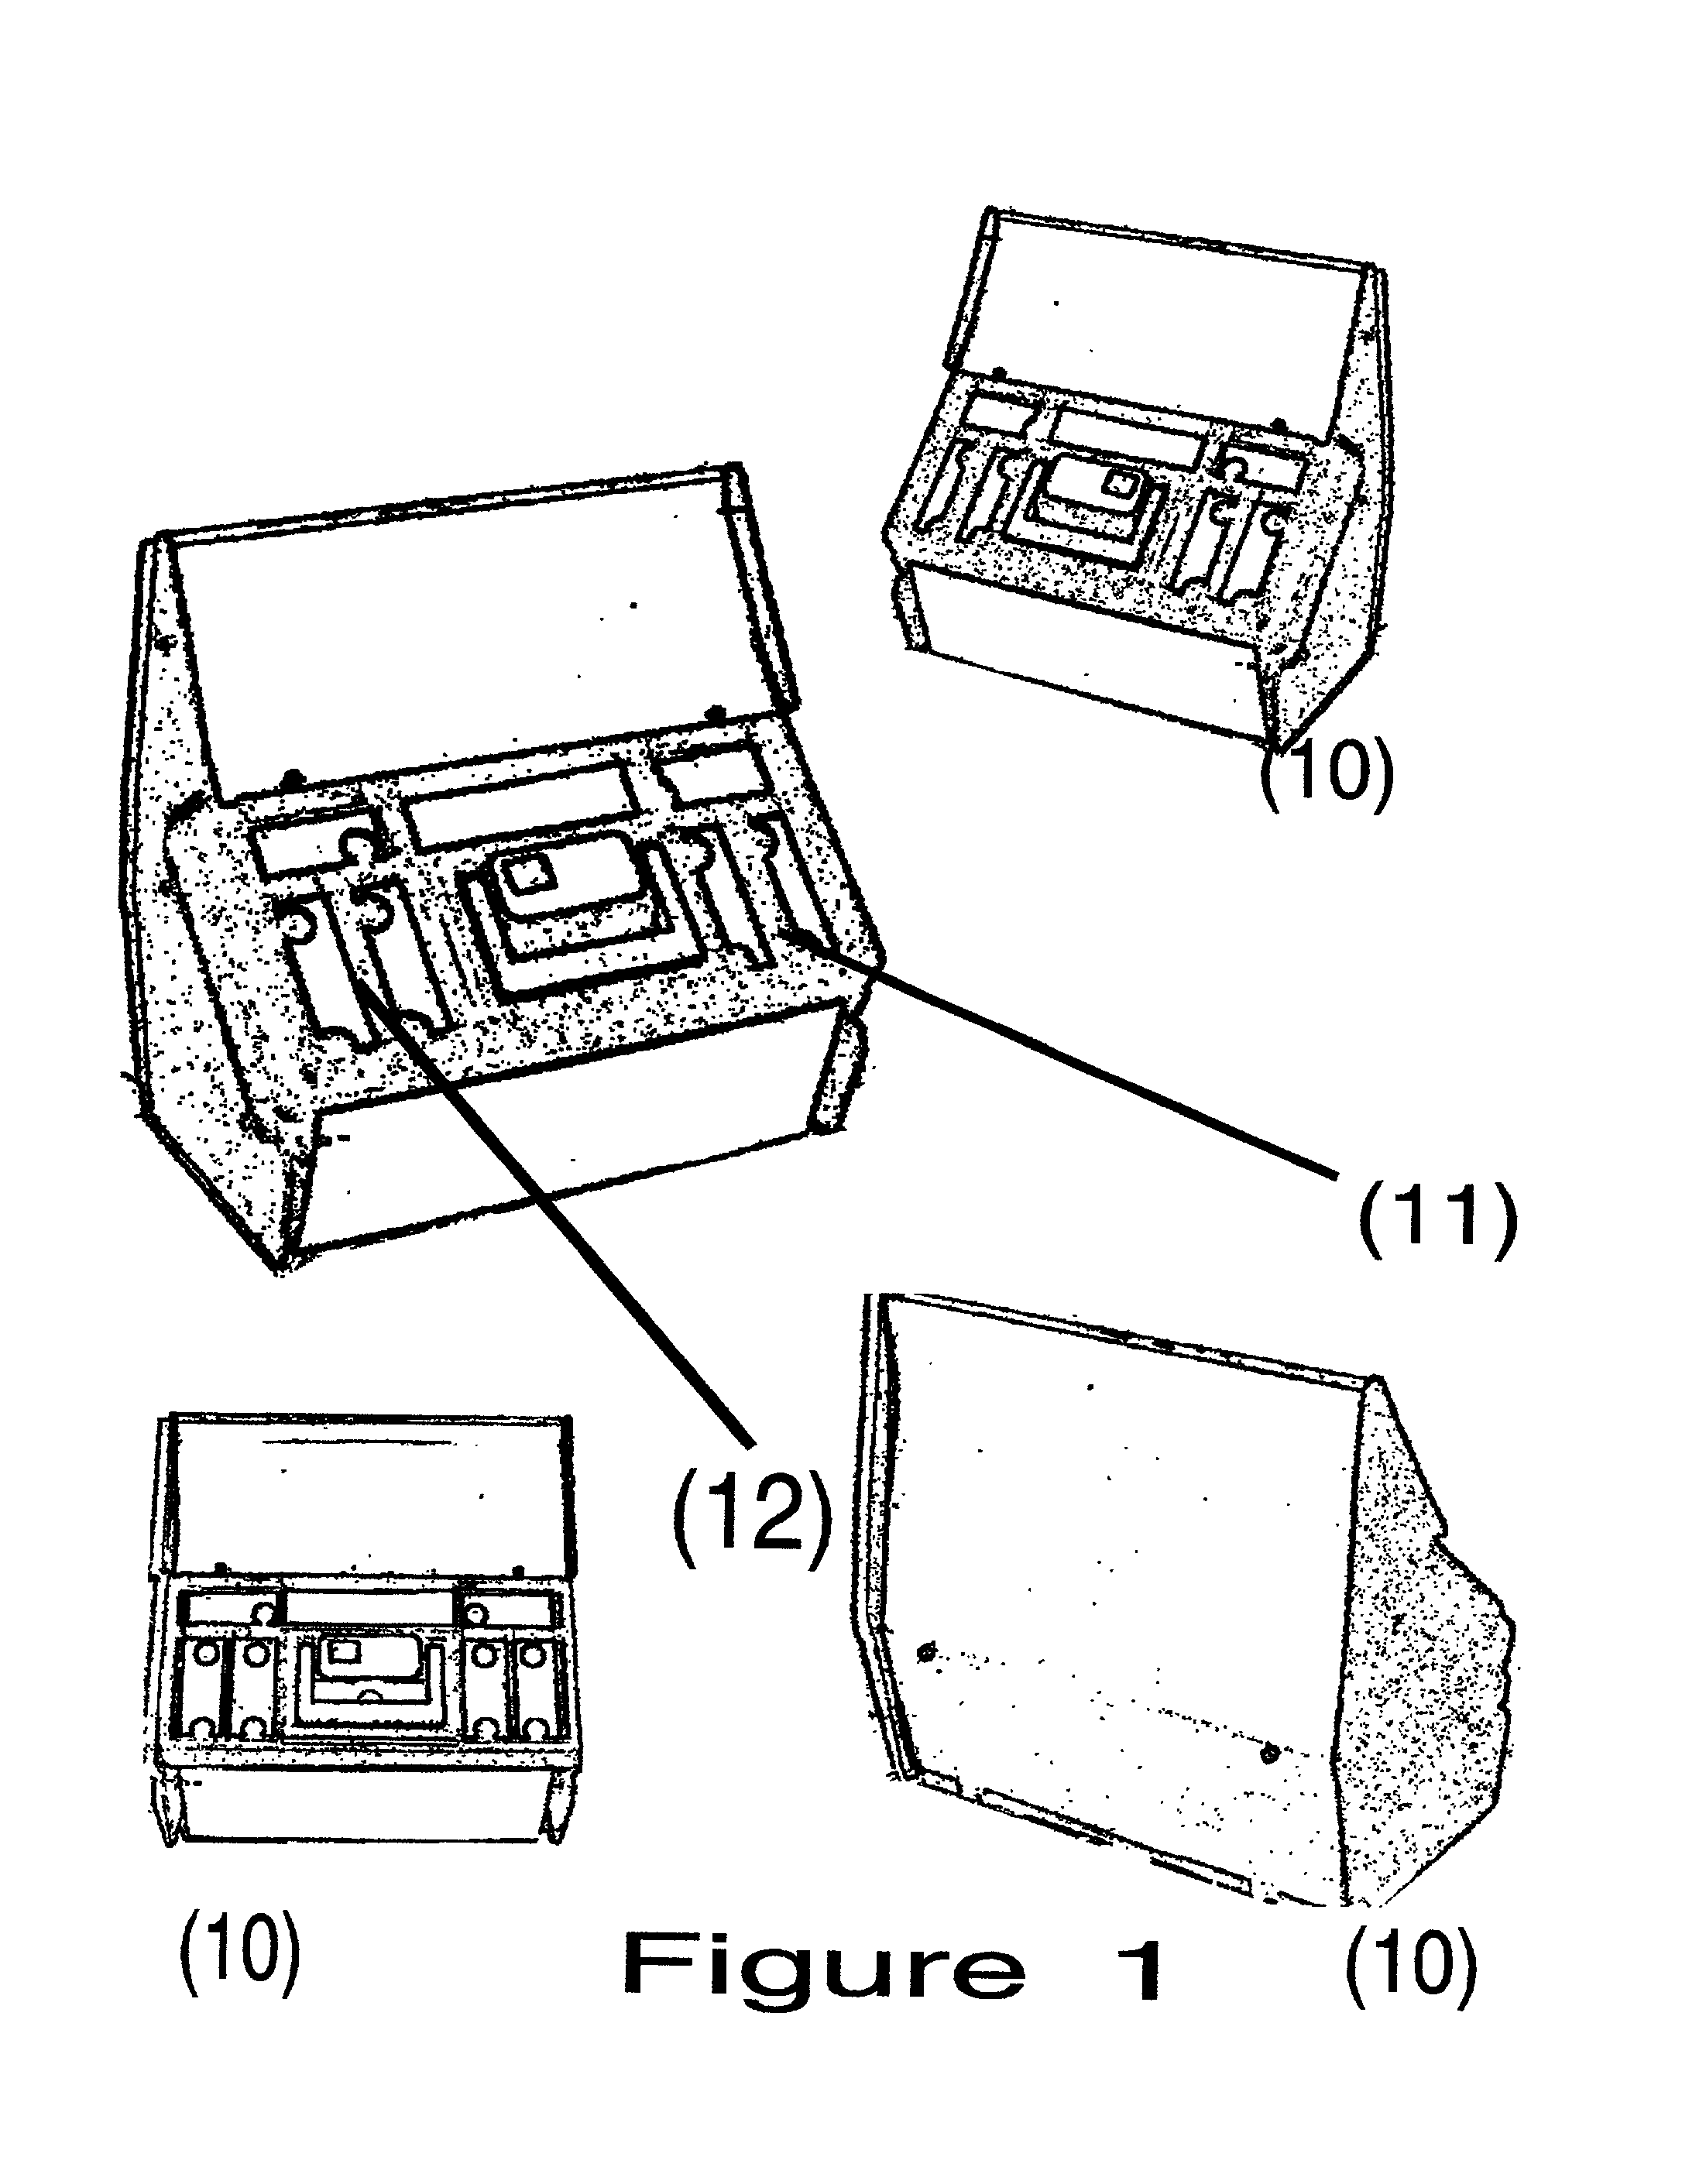 Method of distributing widespread portable emergency cellular power and e-911 assistance